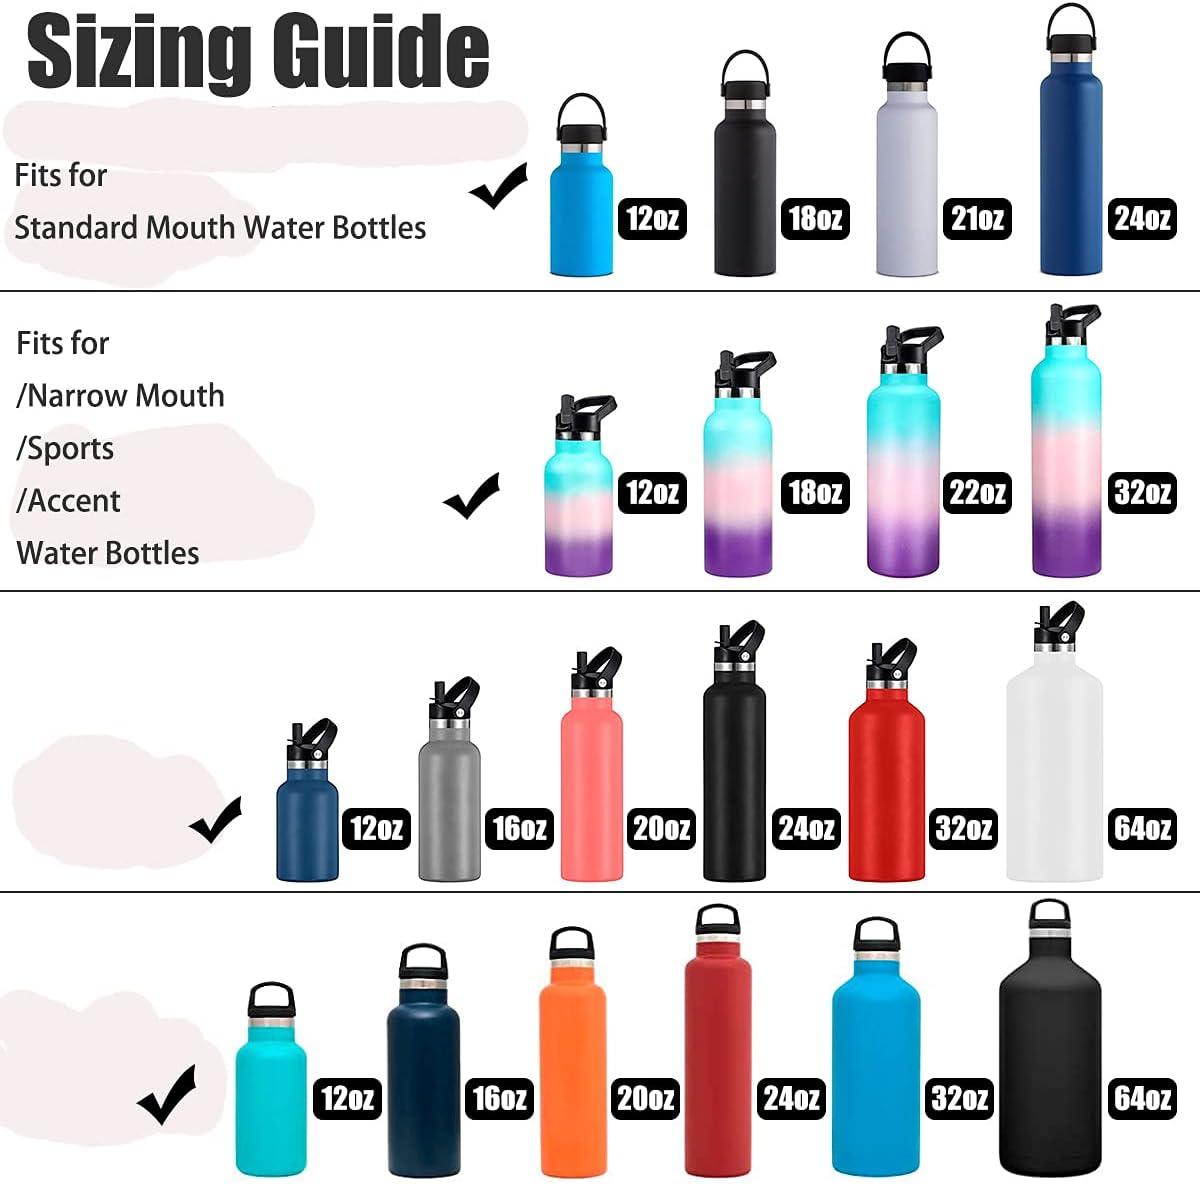 Straw Lid for Hydro Flask Standard Mouth Water Bottle. New and Improved  Design Replacement Cap for 1.91 Mouth Insulated Water Bottle 12 oz, 18 oz,  21